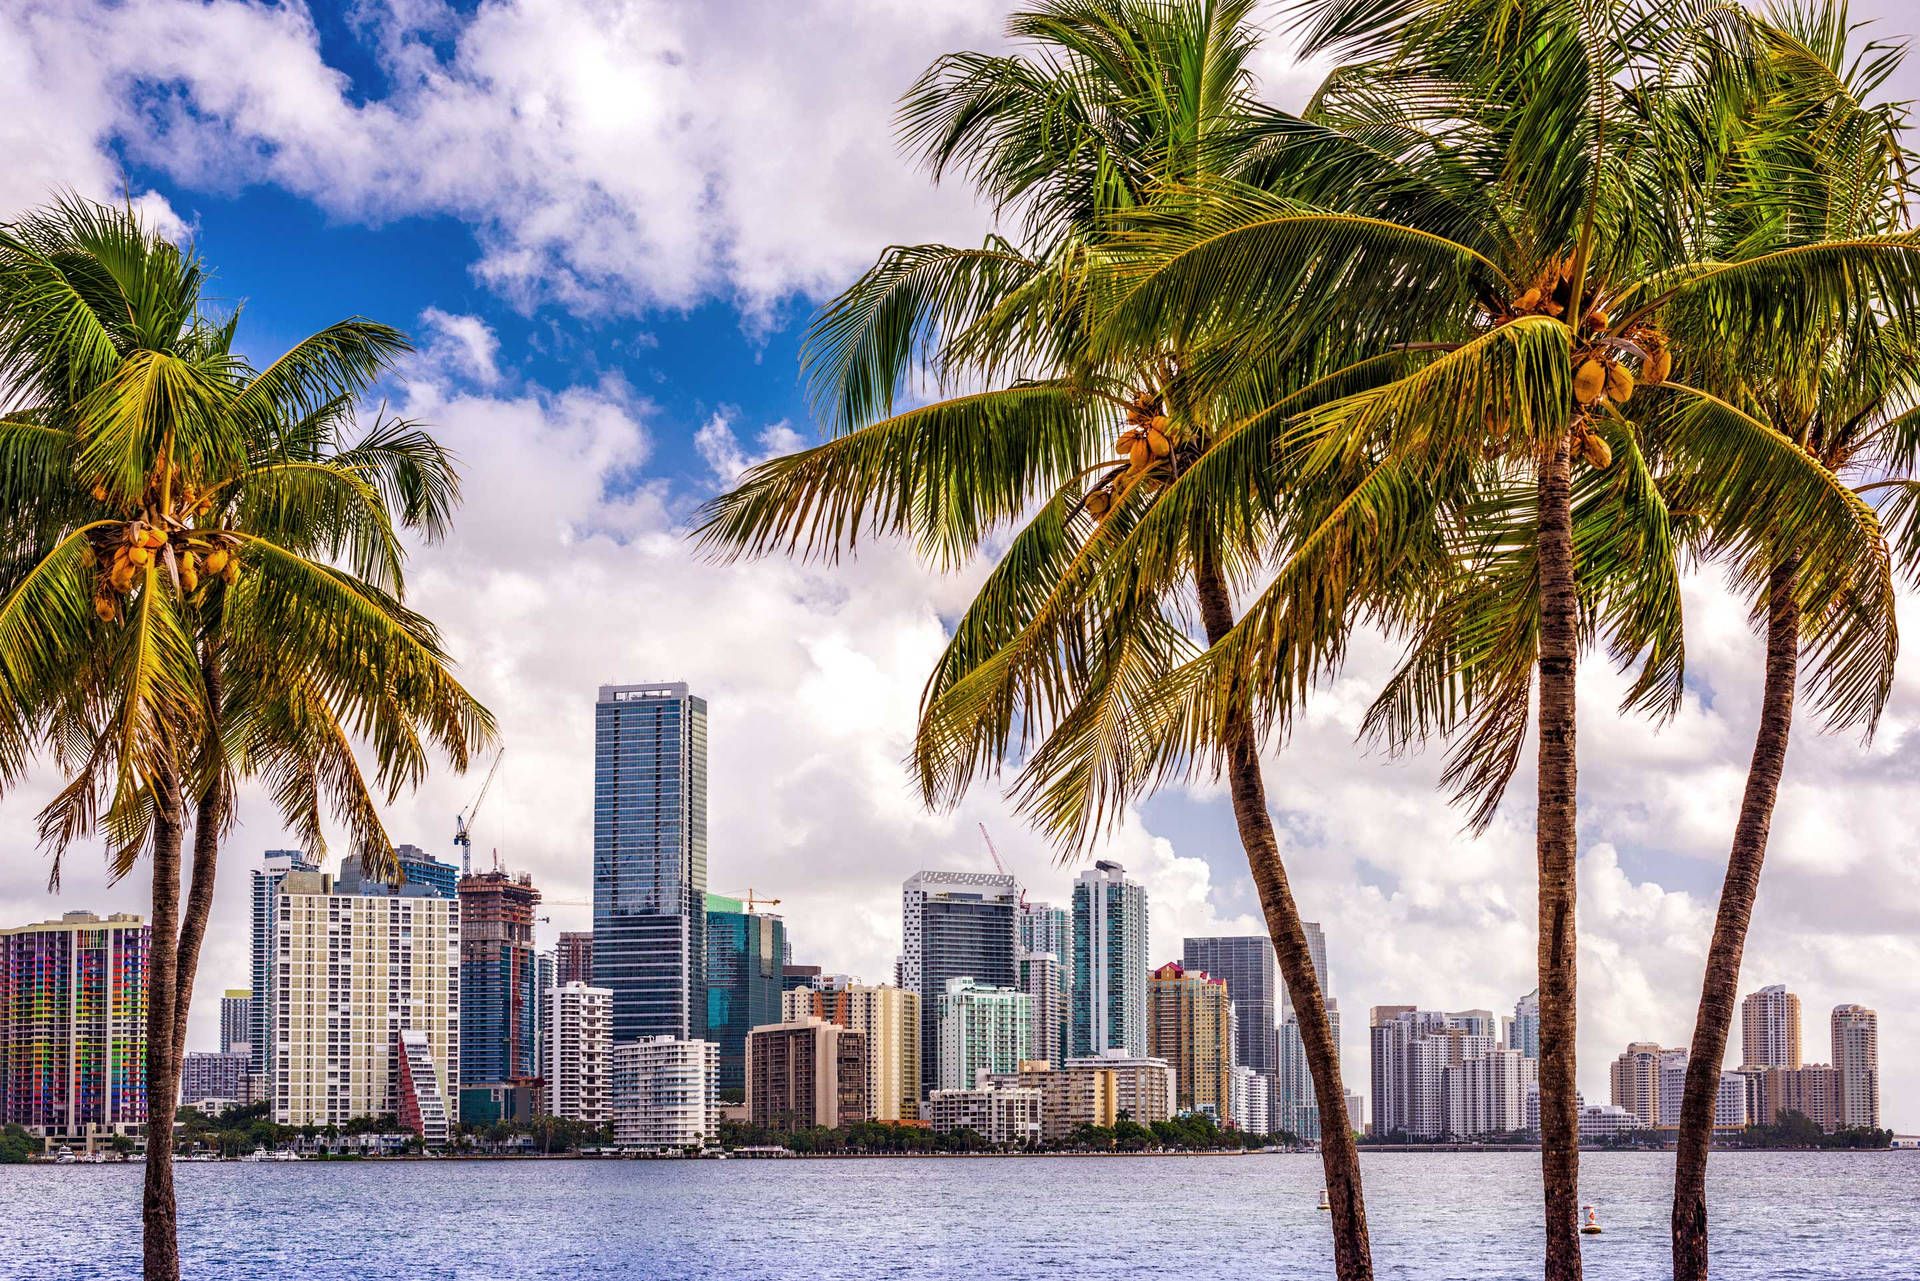 The skyline of Miami with palm trees in the foreground. - Miami